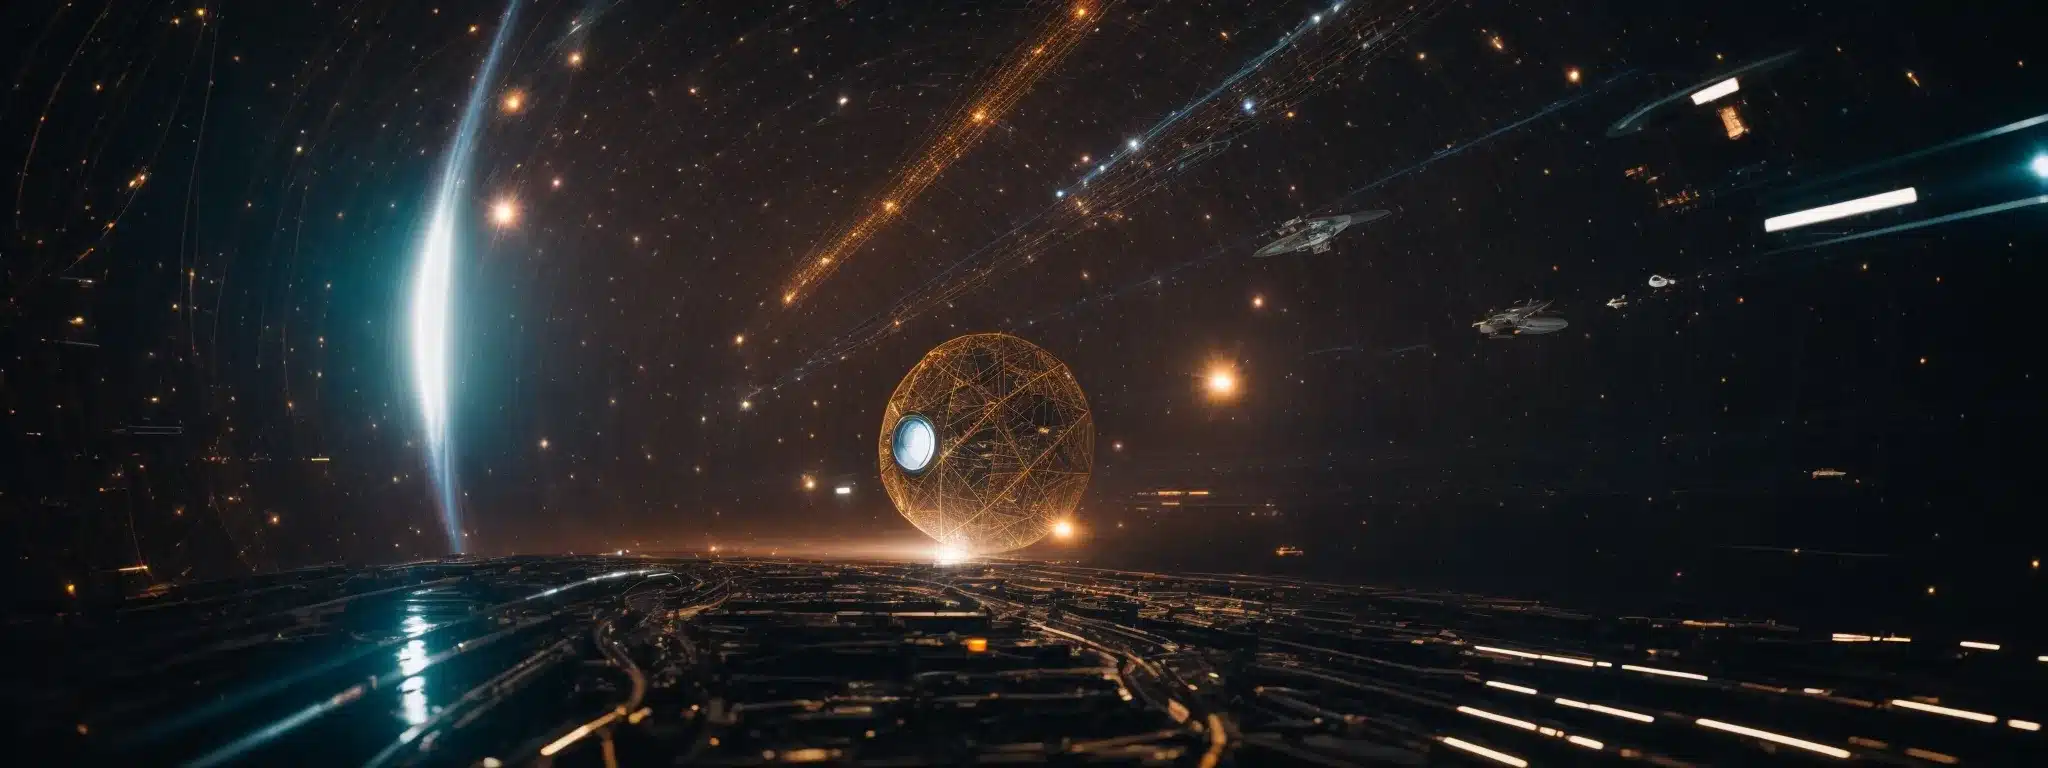 A Spacecraft Traveling Through A Network Of Illuminated Pathways Connecting Different Planets And Stars.